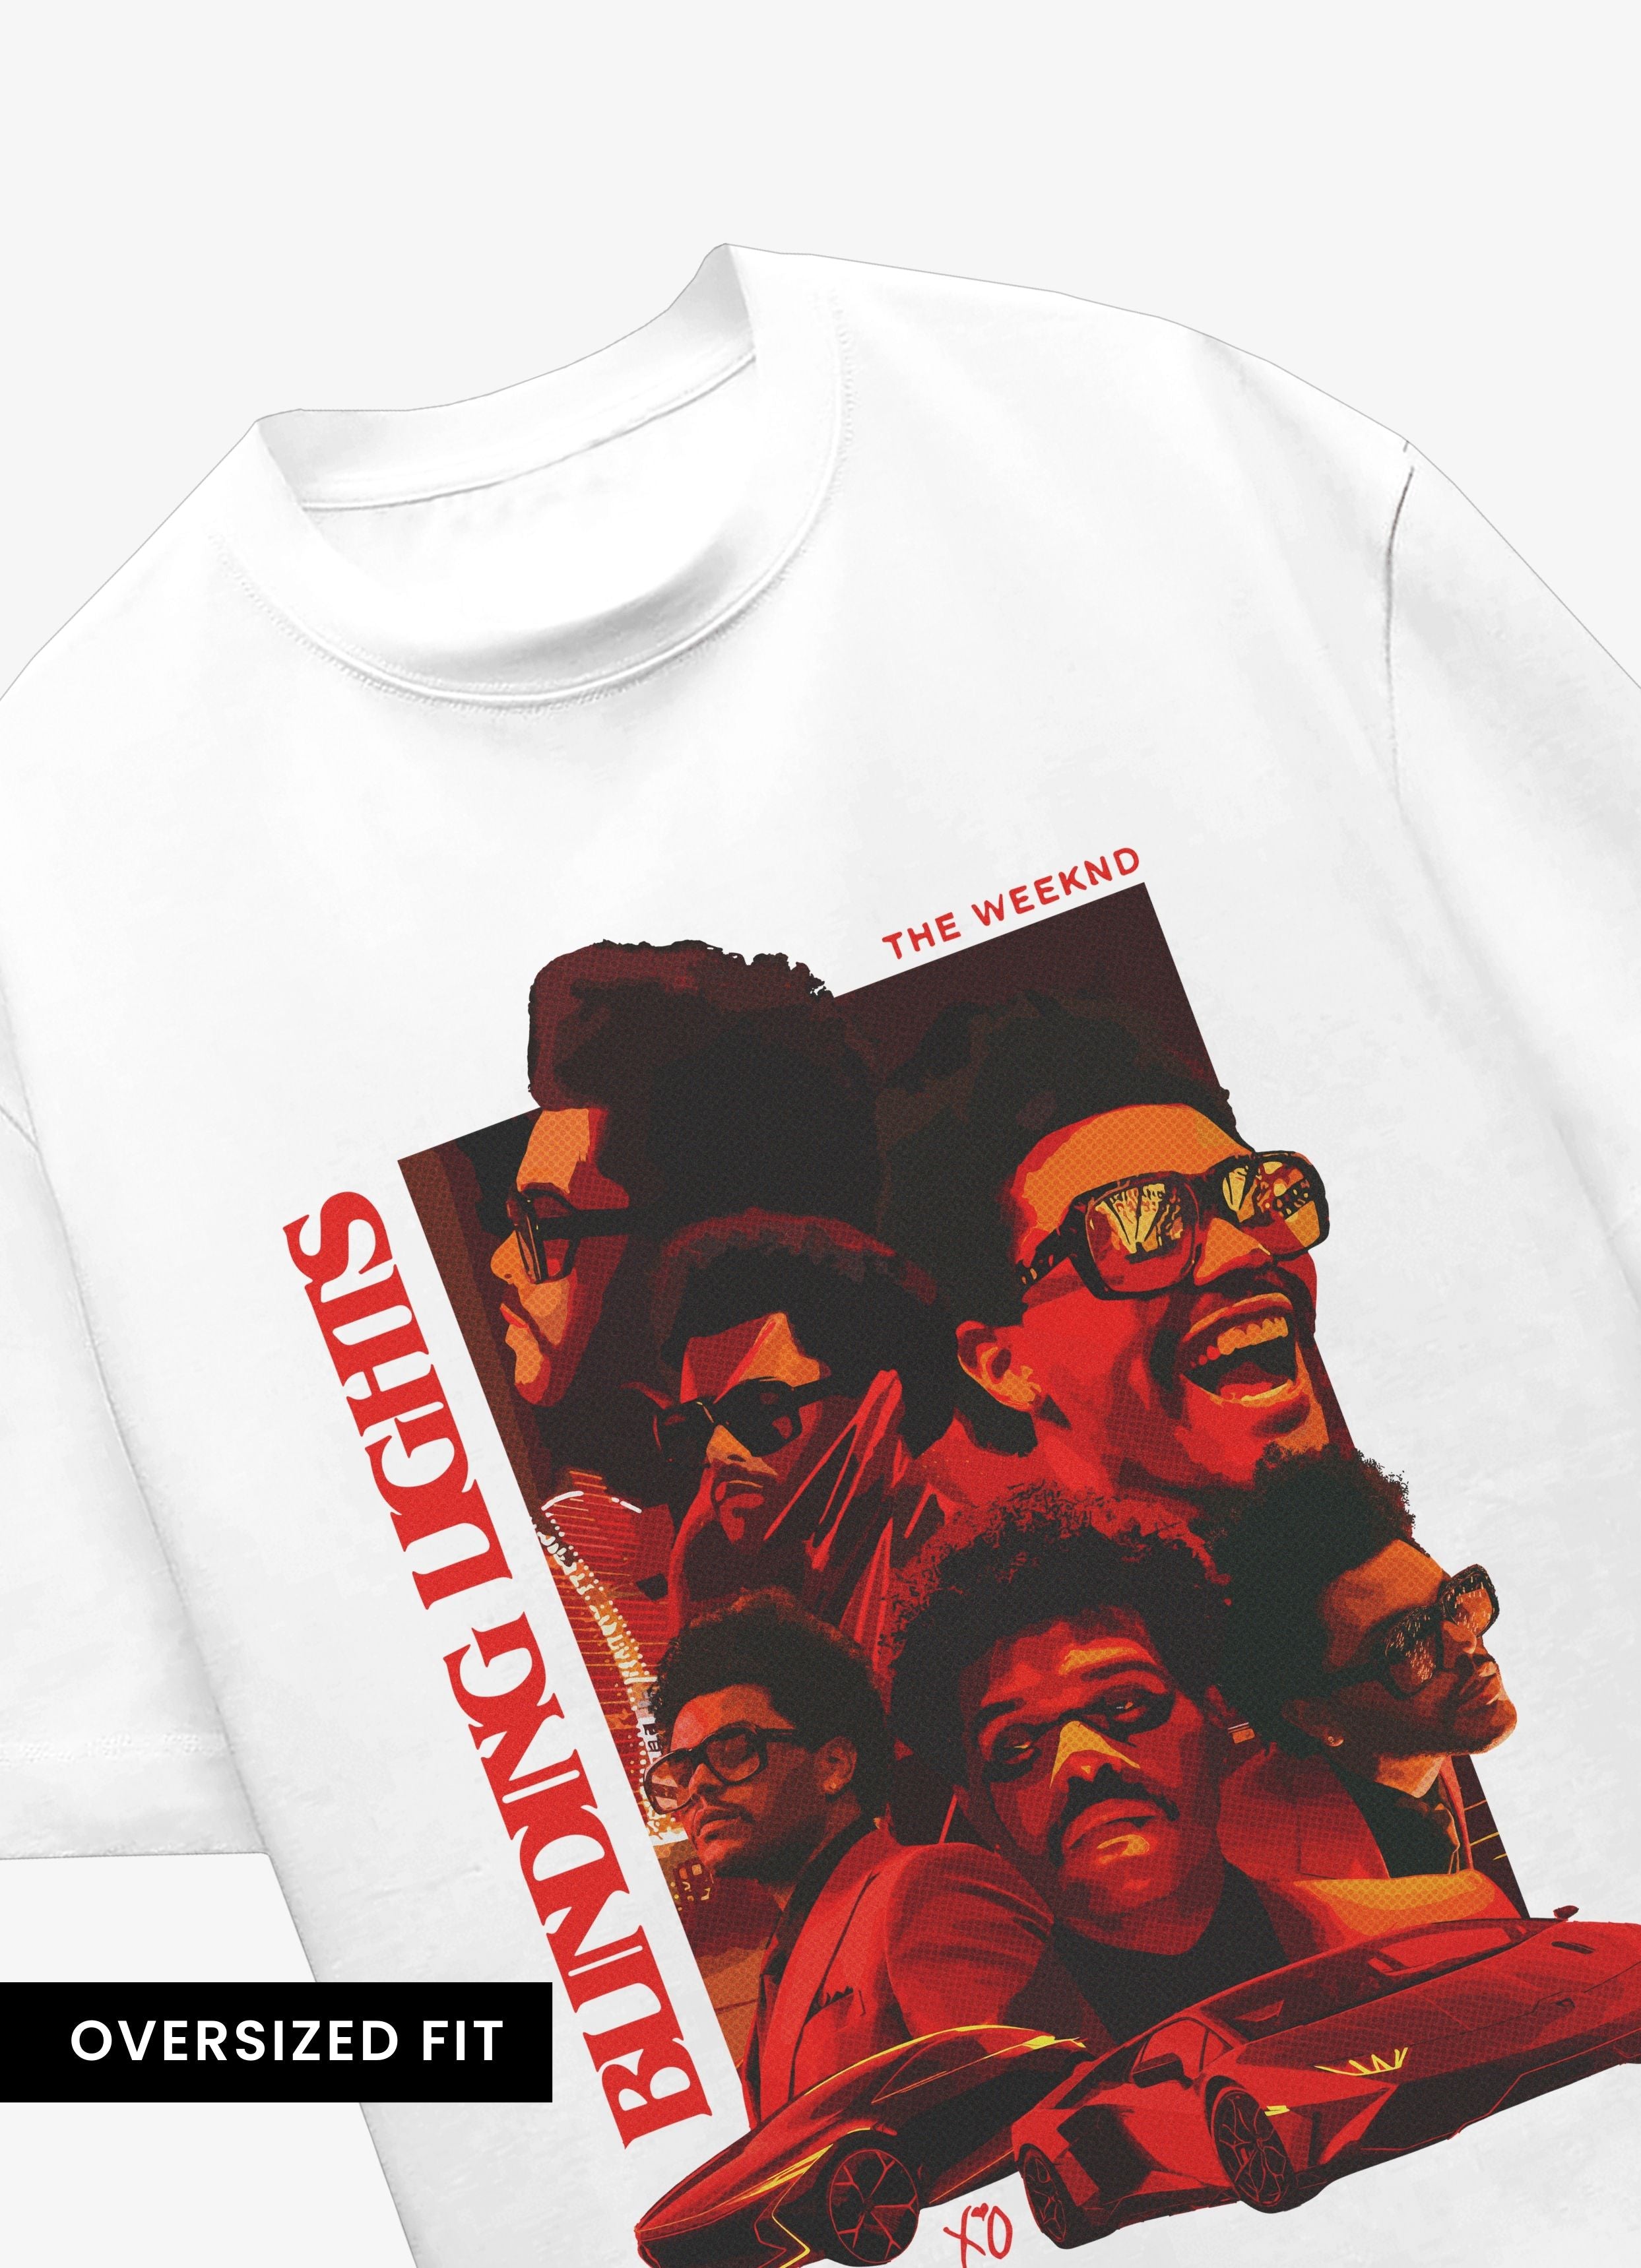 Weeknd Blinding Lights Front Oversized Tshirt